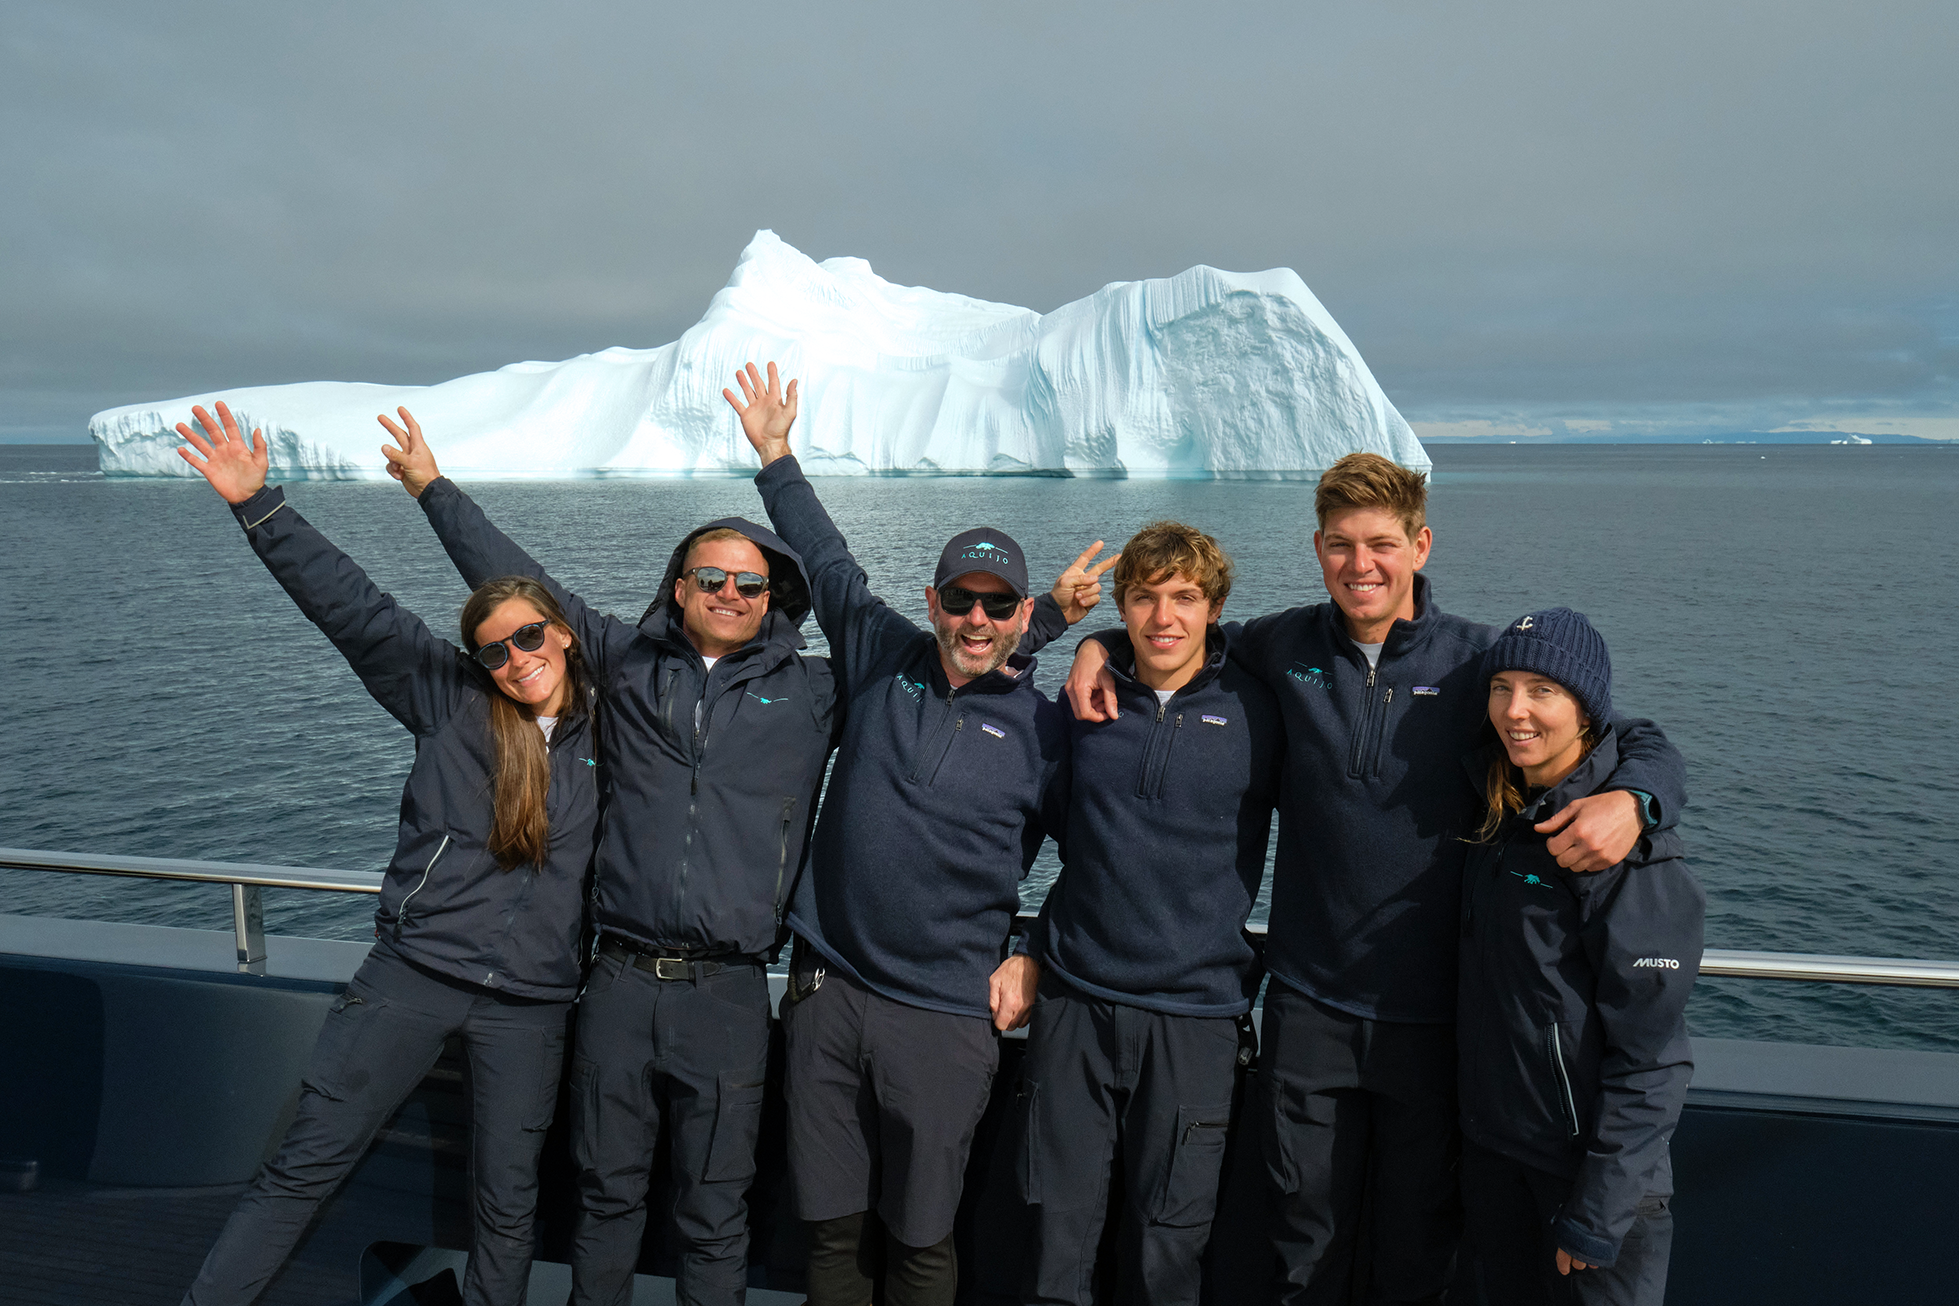 Crew of the Sail Yacht AQuiJo posing in front of an iceberg